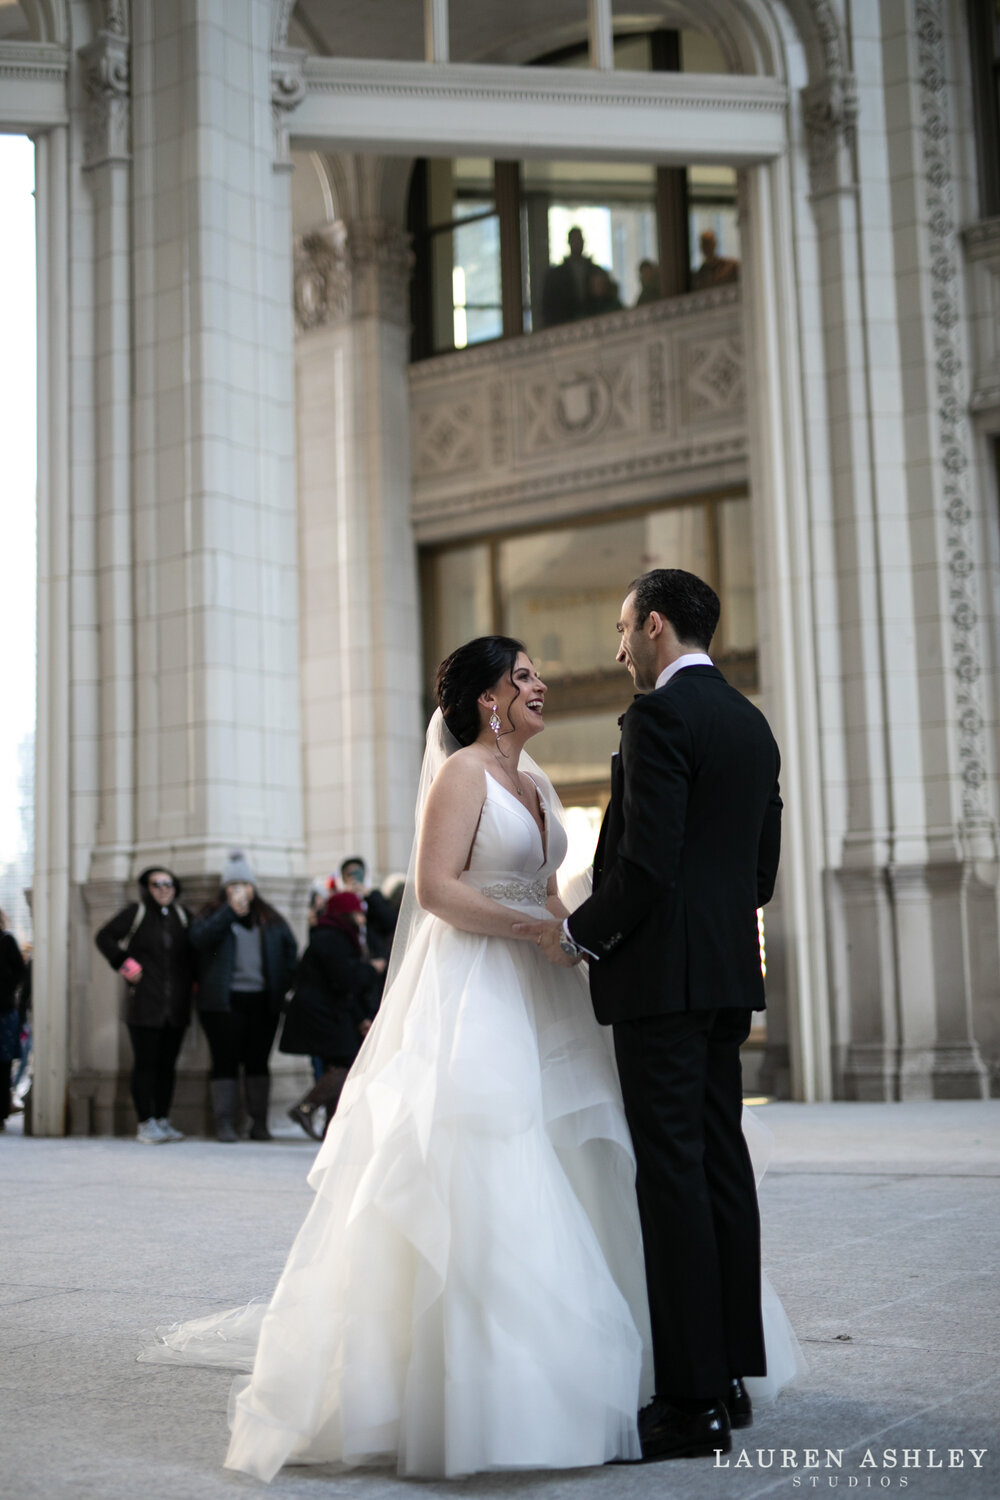 intercontinental-chicago-high-end-michigan-ave-magnificent-mile-wedding-chicago-wedding-photography-59.jpg